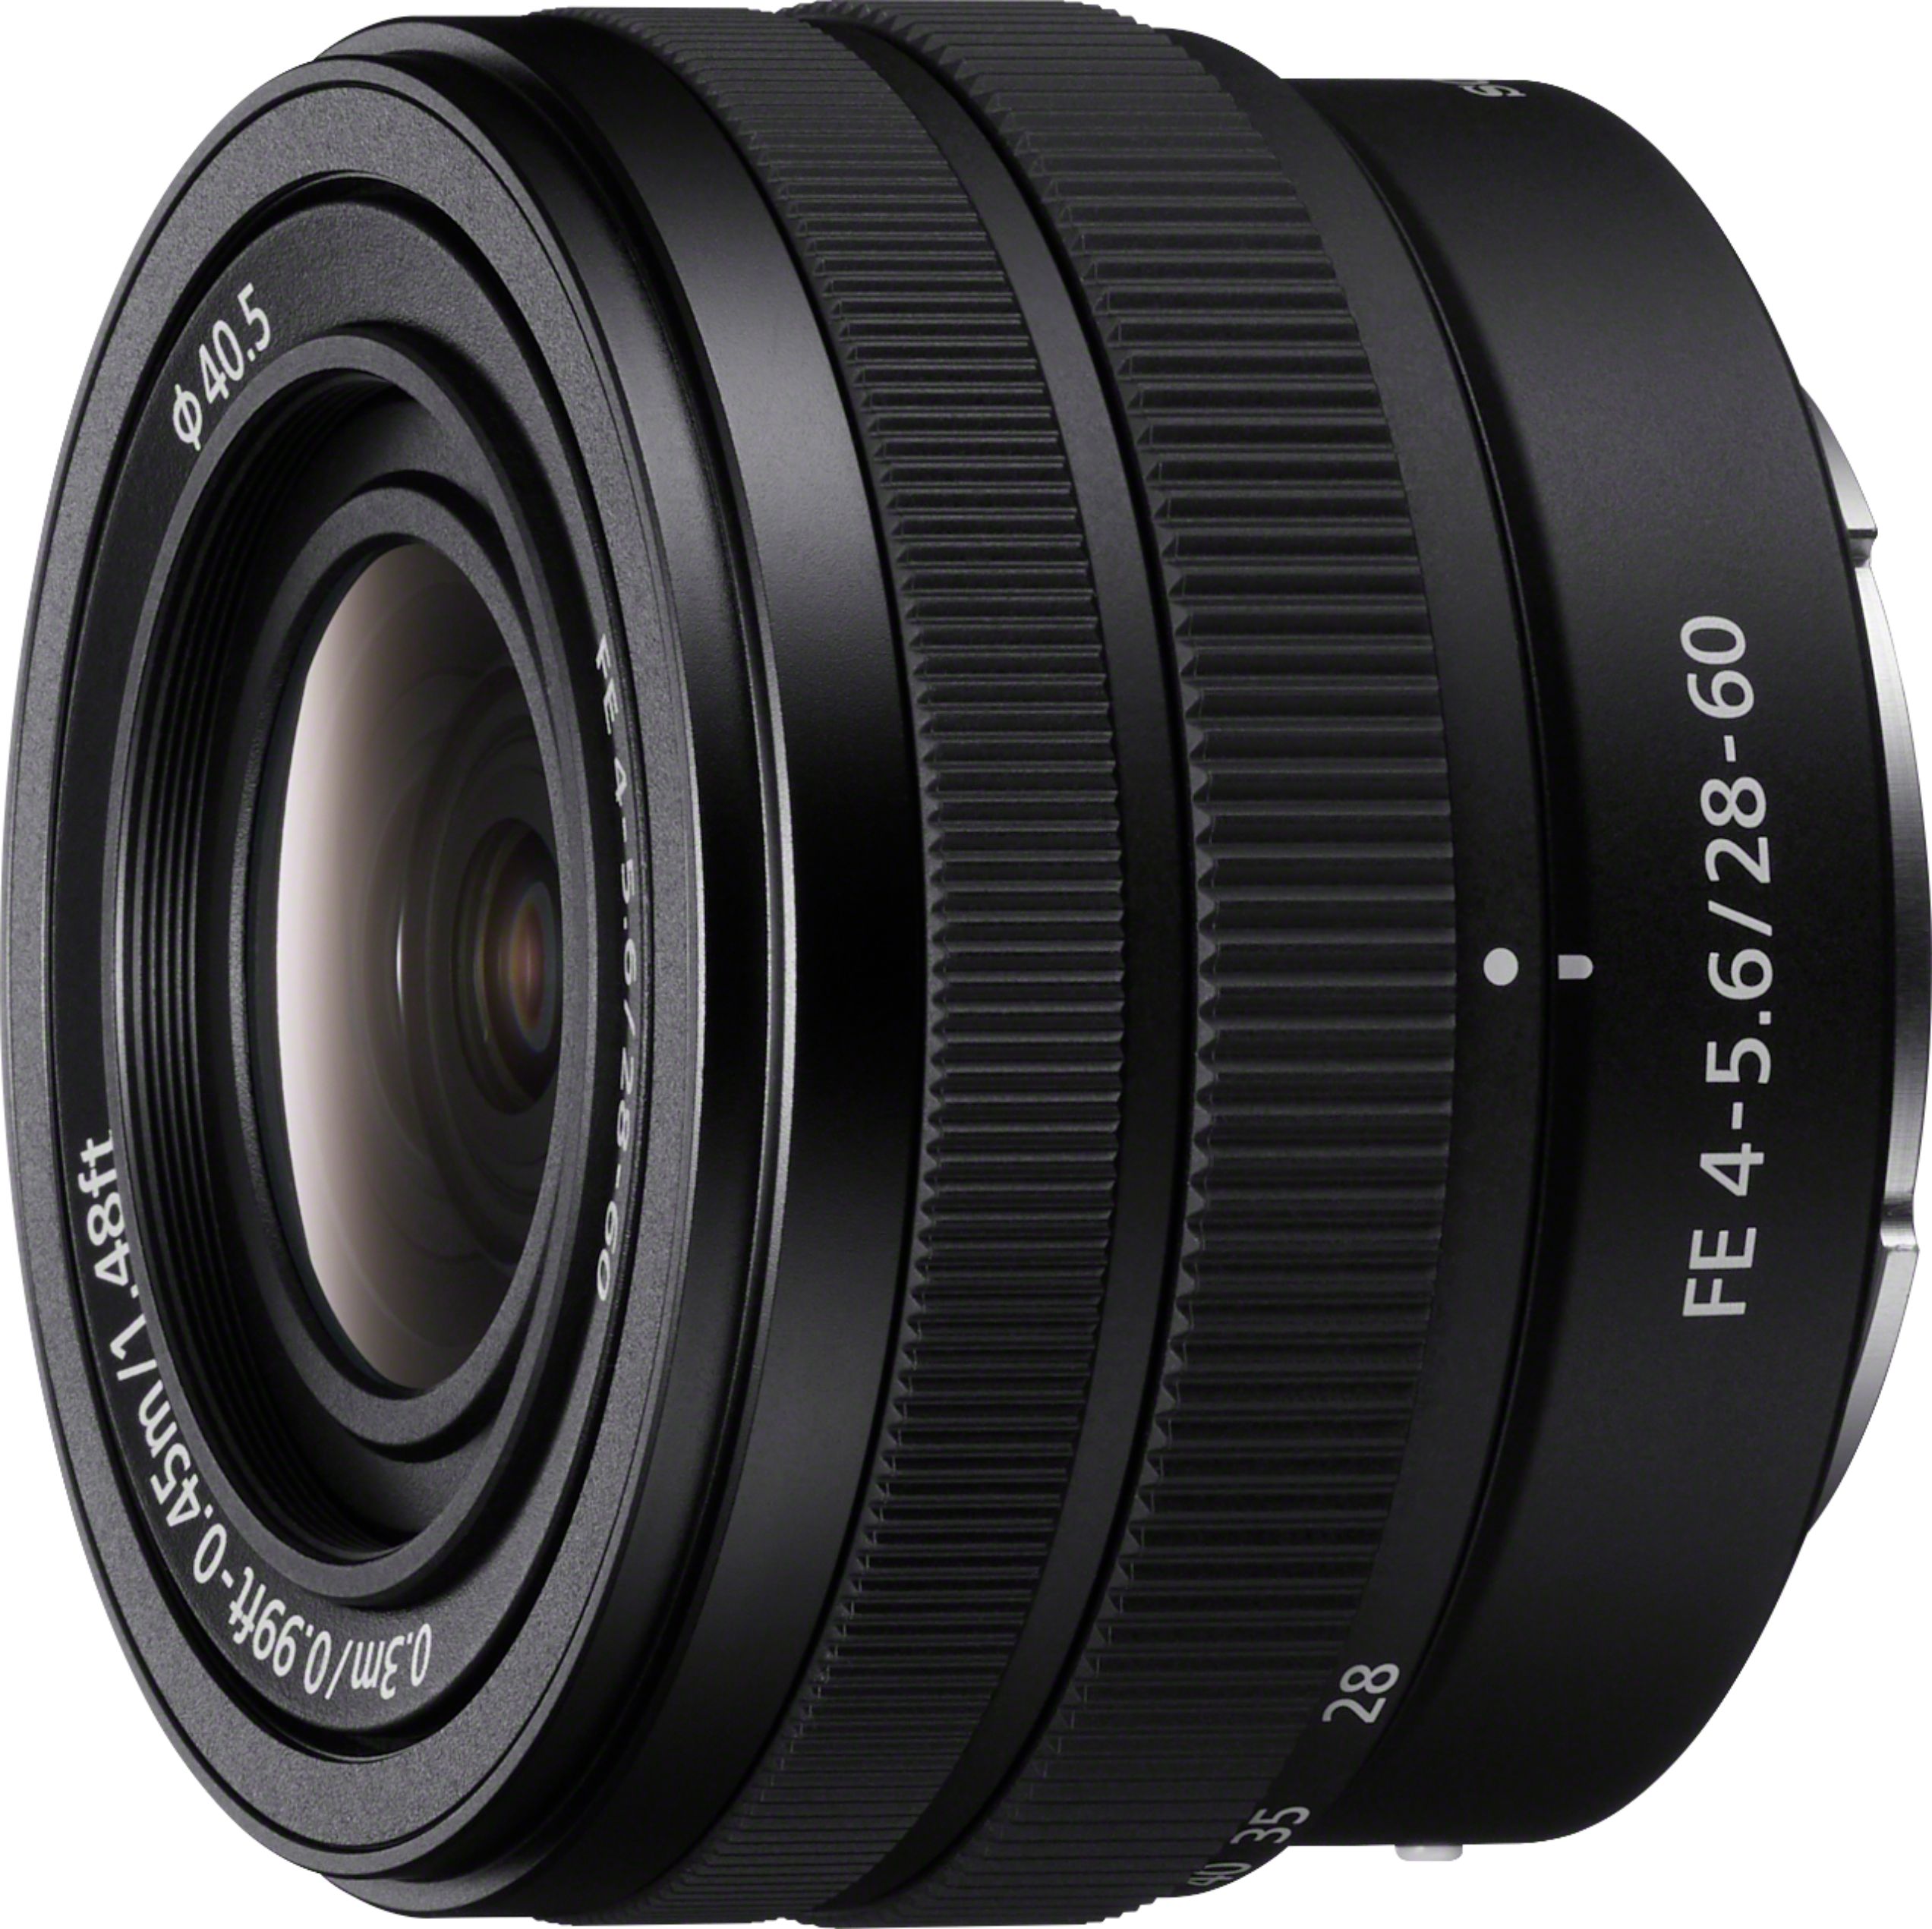 Angle View: Sony - Alpha FE 28-60mm F4-5.6 Full-frame Compact Zoom Lens - Black